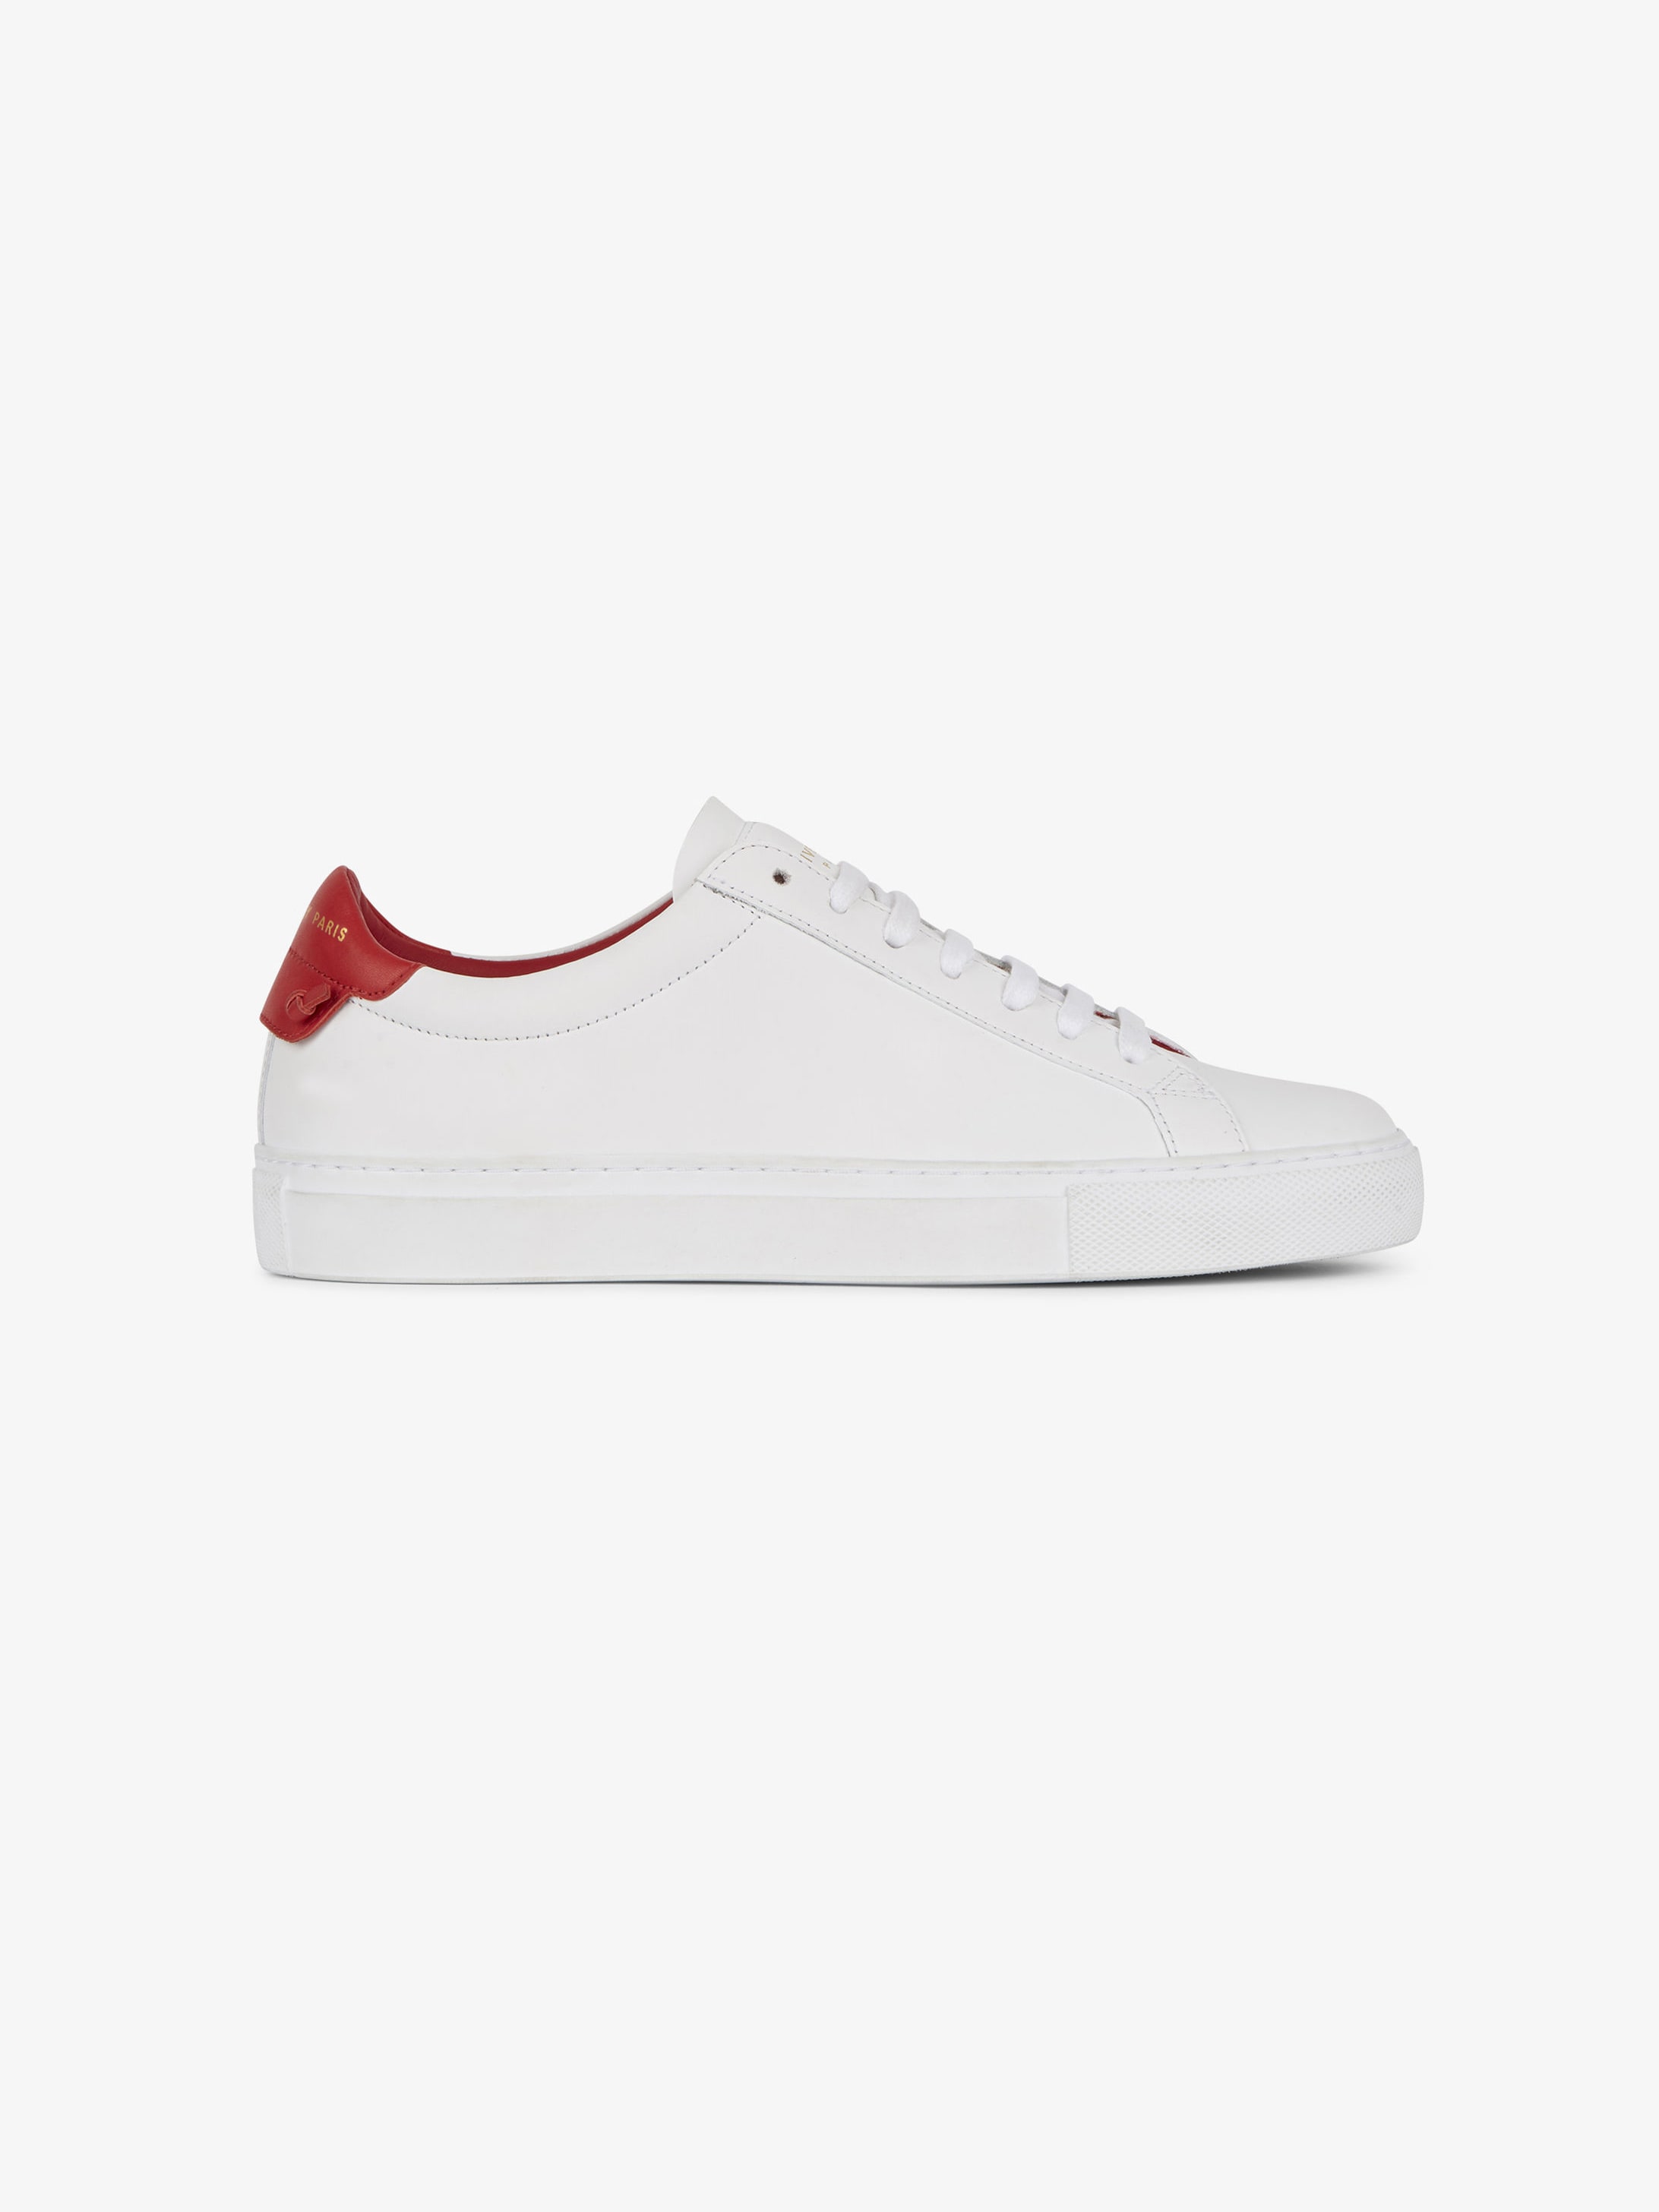 Givenchy Urban Street Sneakers in 